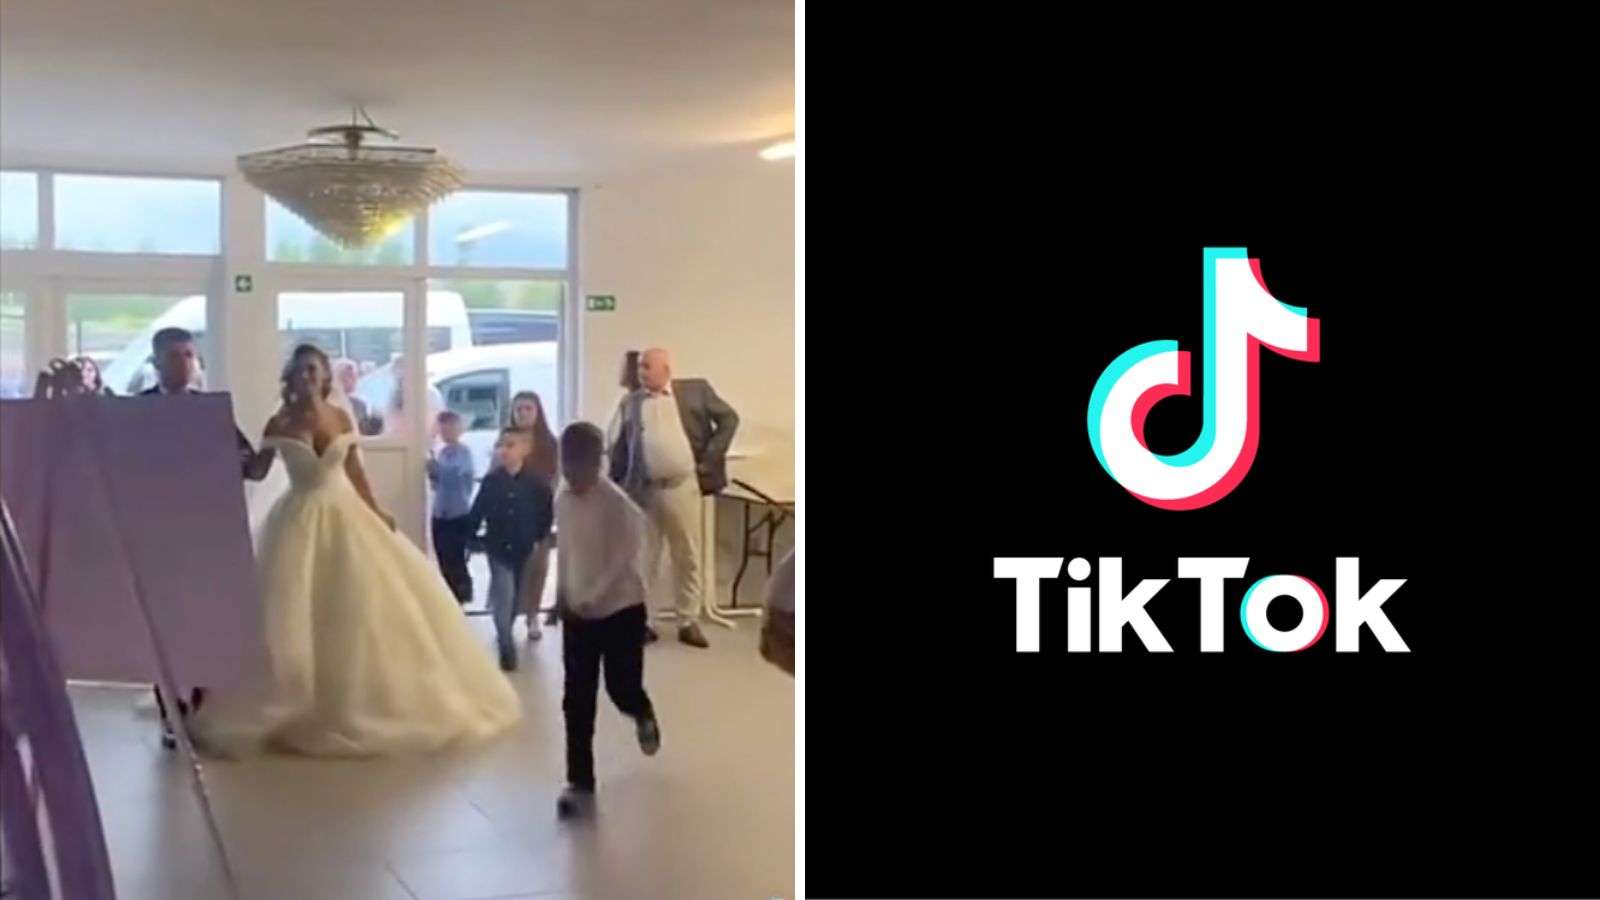 Couple’s grand wedding entrance gets ‘ruined’ by kids in viral TikTok